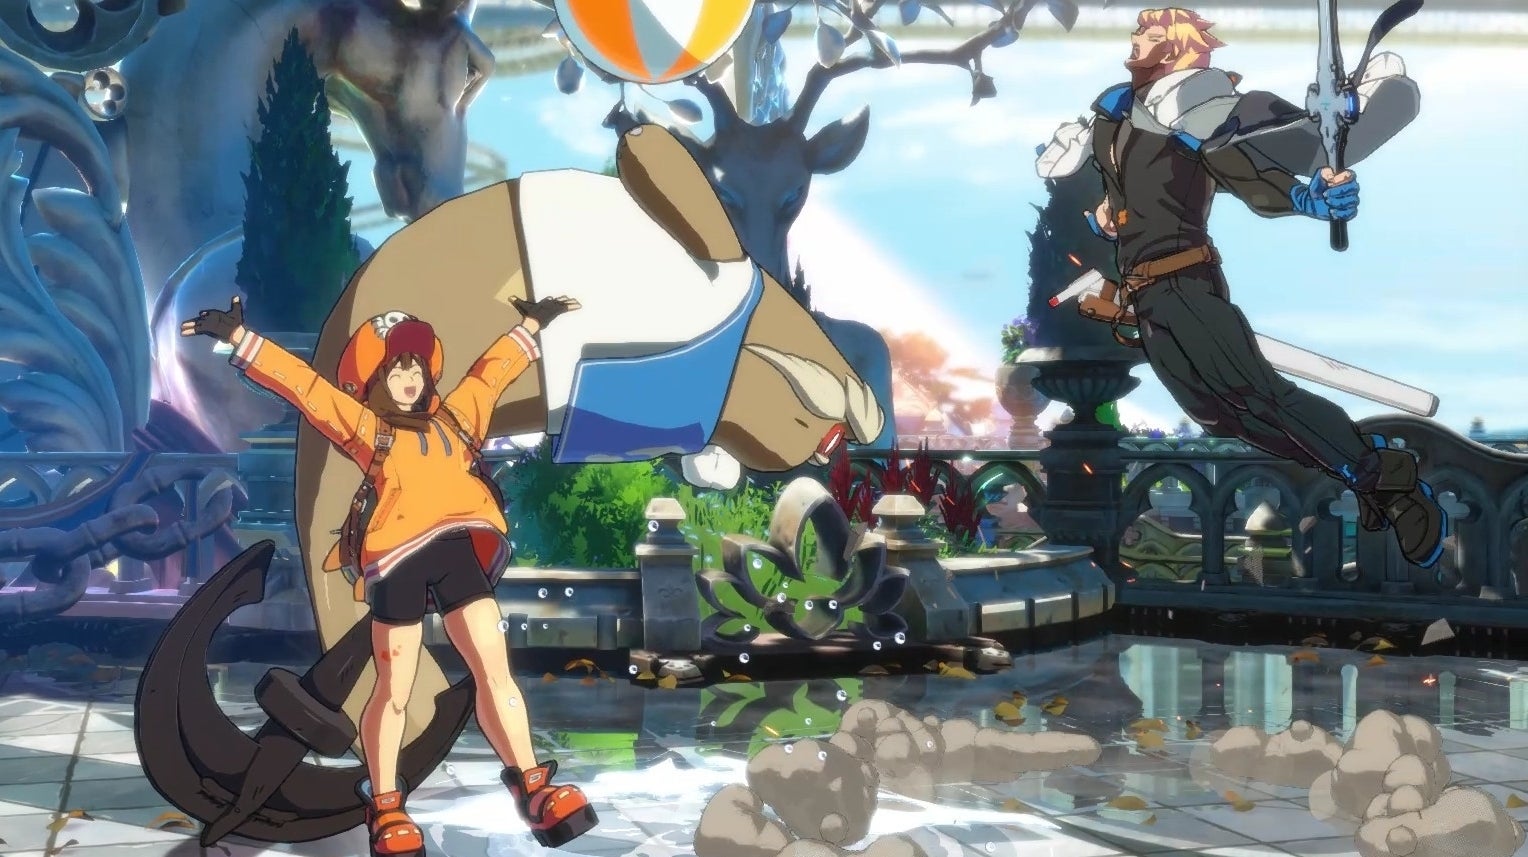 Image for As Guilty Gear Strive punches through 300k sold, dataminer unearths potential DLC characters list